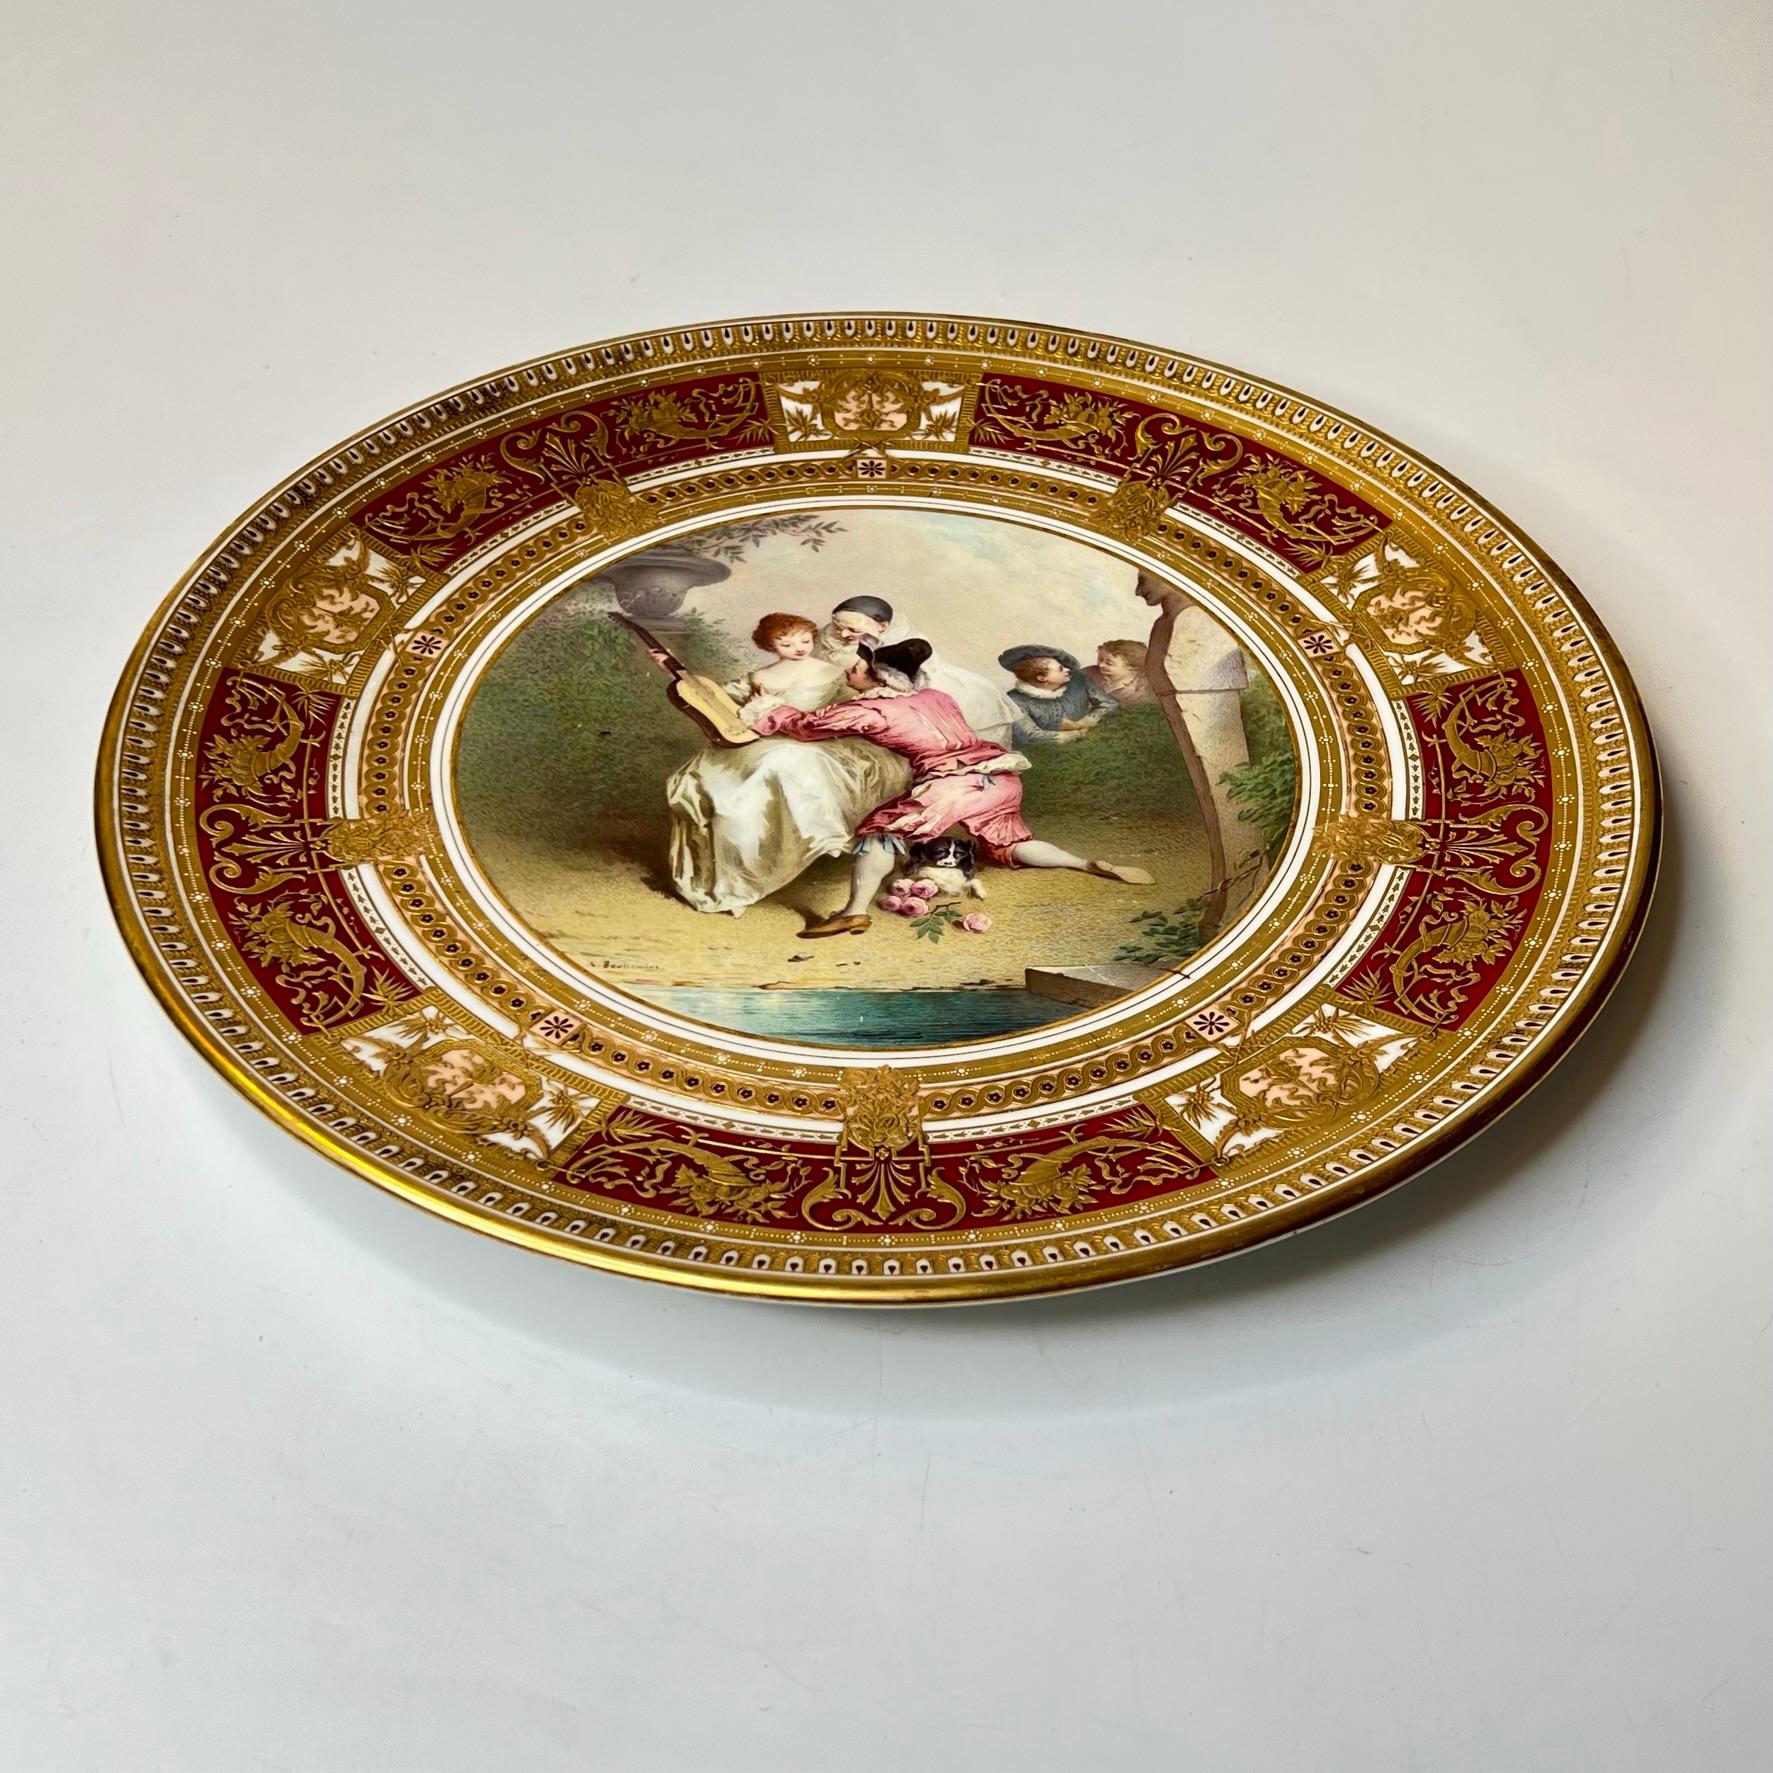 Antique Royal Vienna porcelain plate painted by Antonin Boullemier (1840-1900), depicting courting lovers and with extensive neoclassical mofits and gilt decorations.  Excellent condition, with scattered light scratches and light rubbing wear.